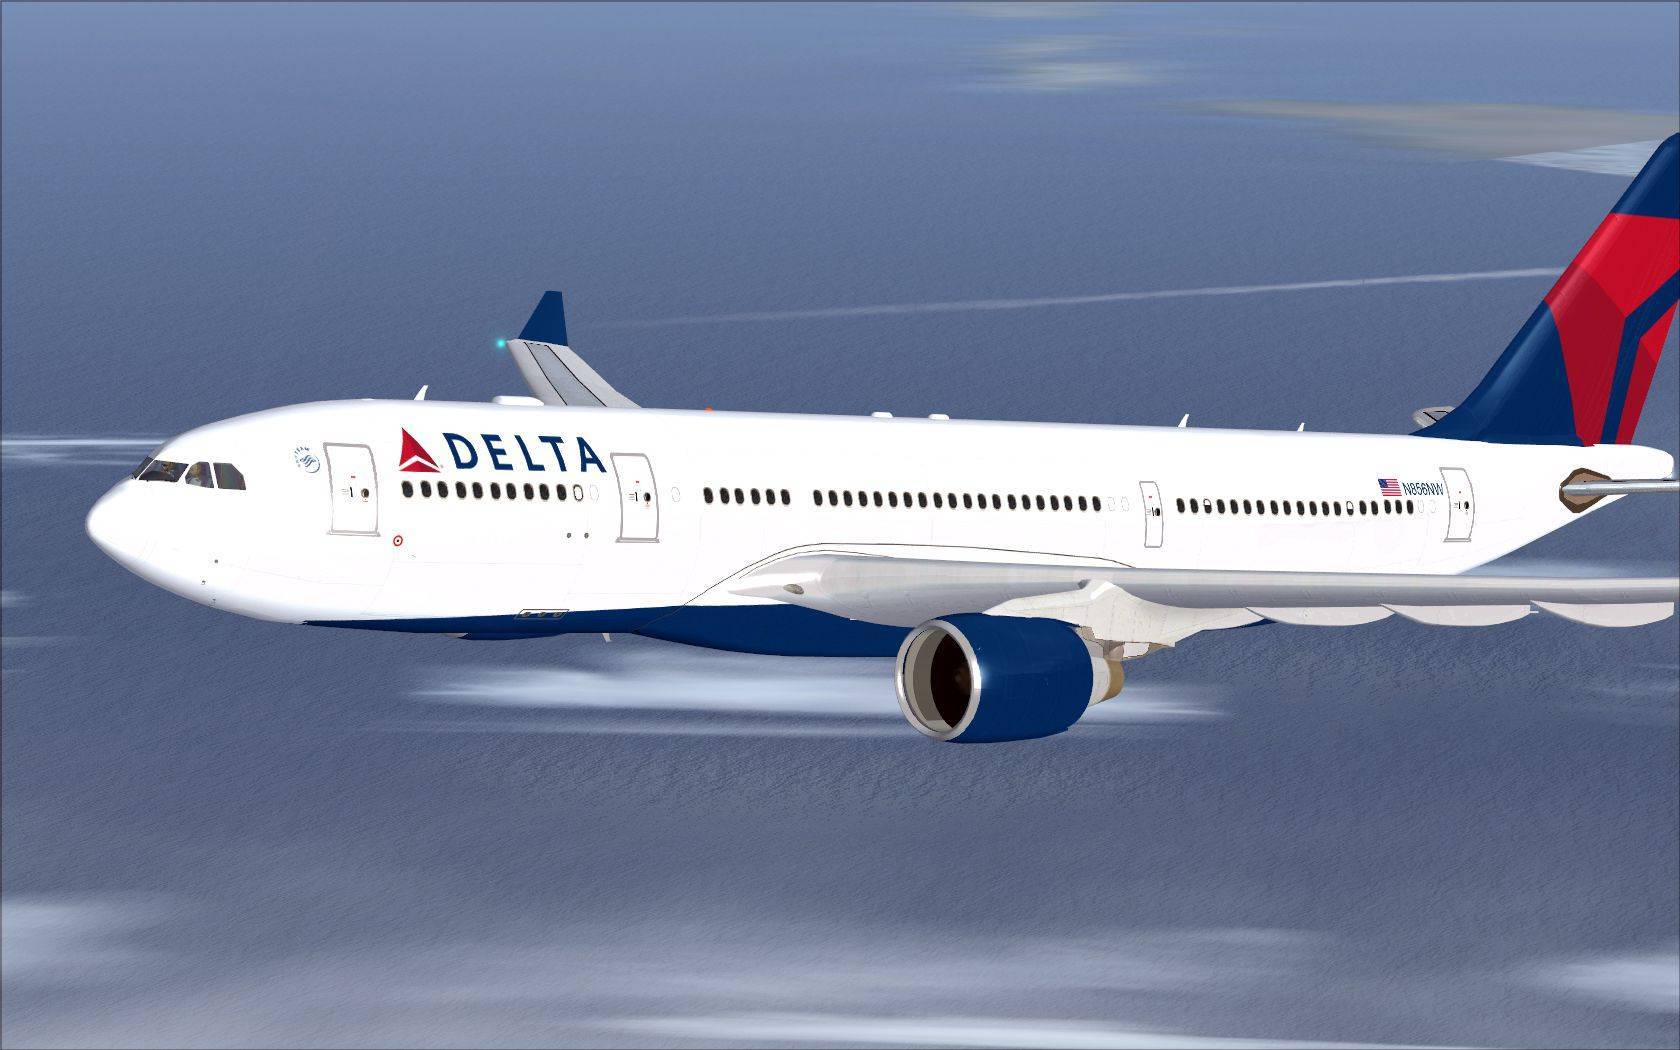 Delta airlines customer service contacts [must read]